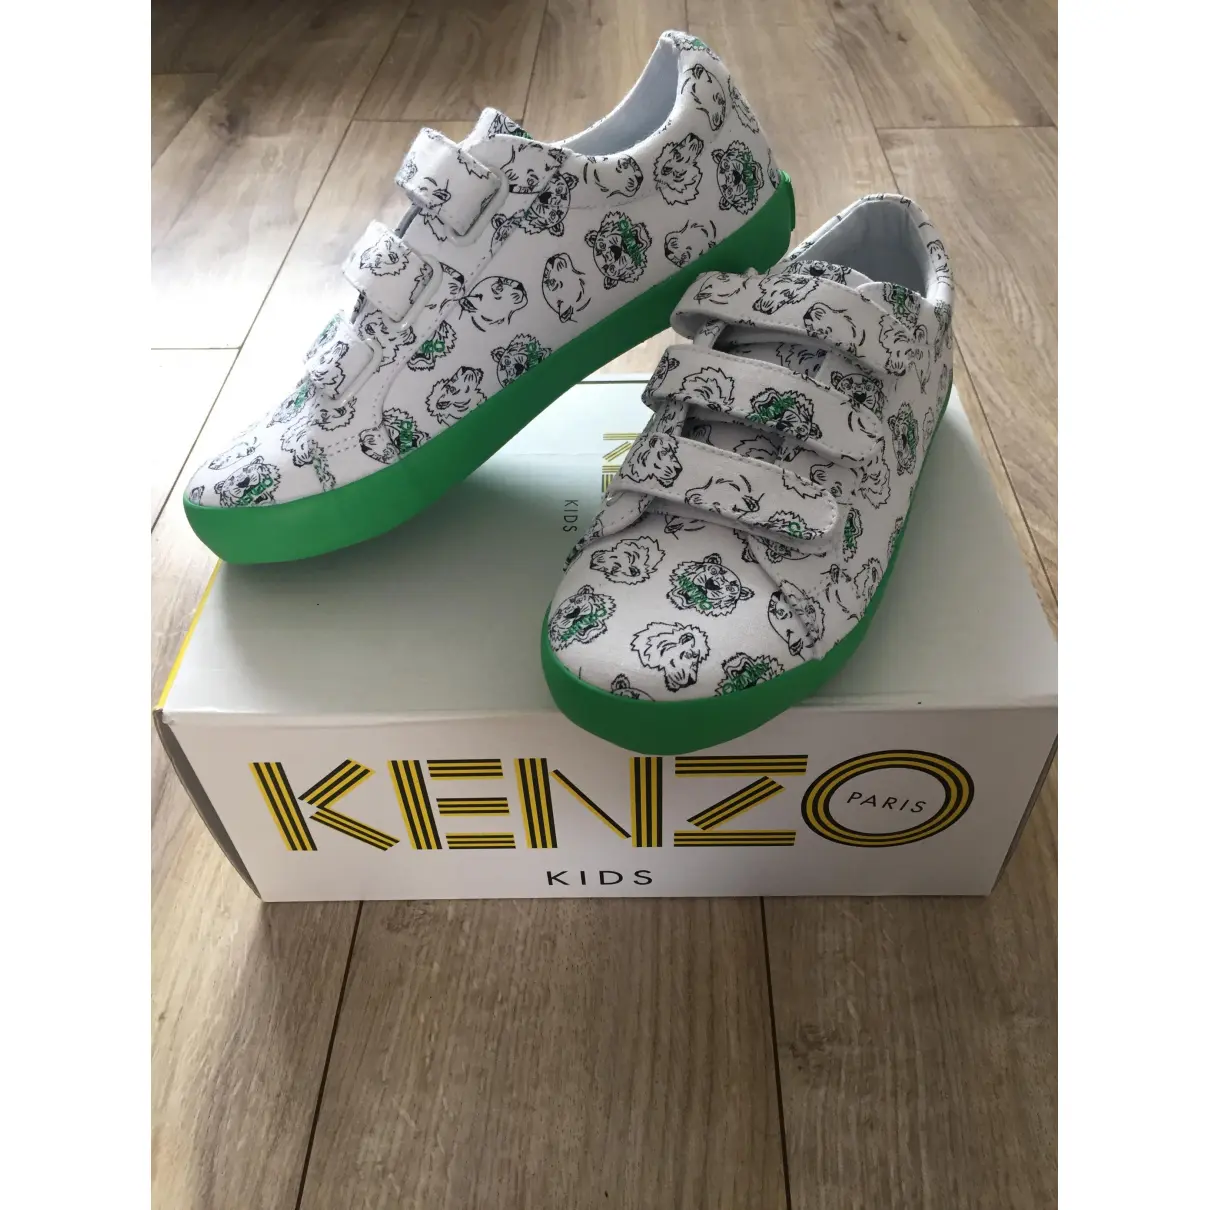 Buy Kenzo Cloth trainers online